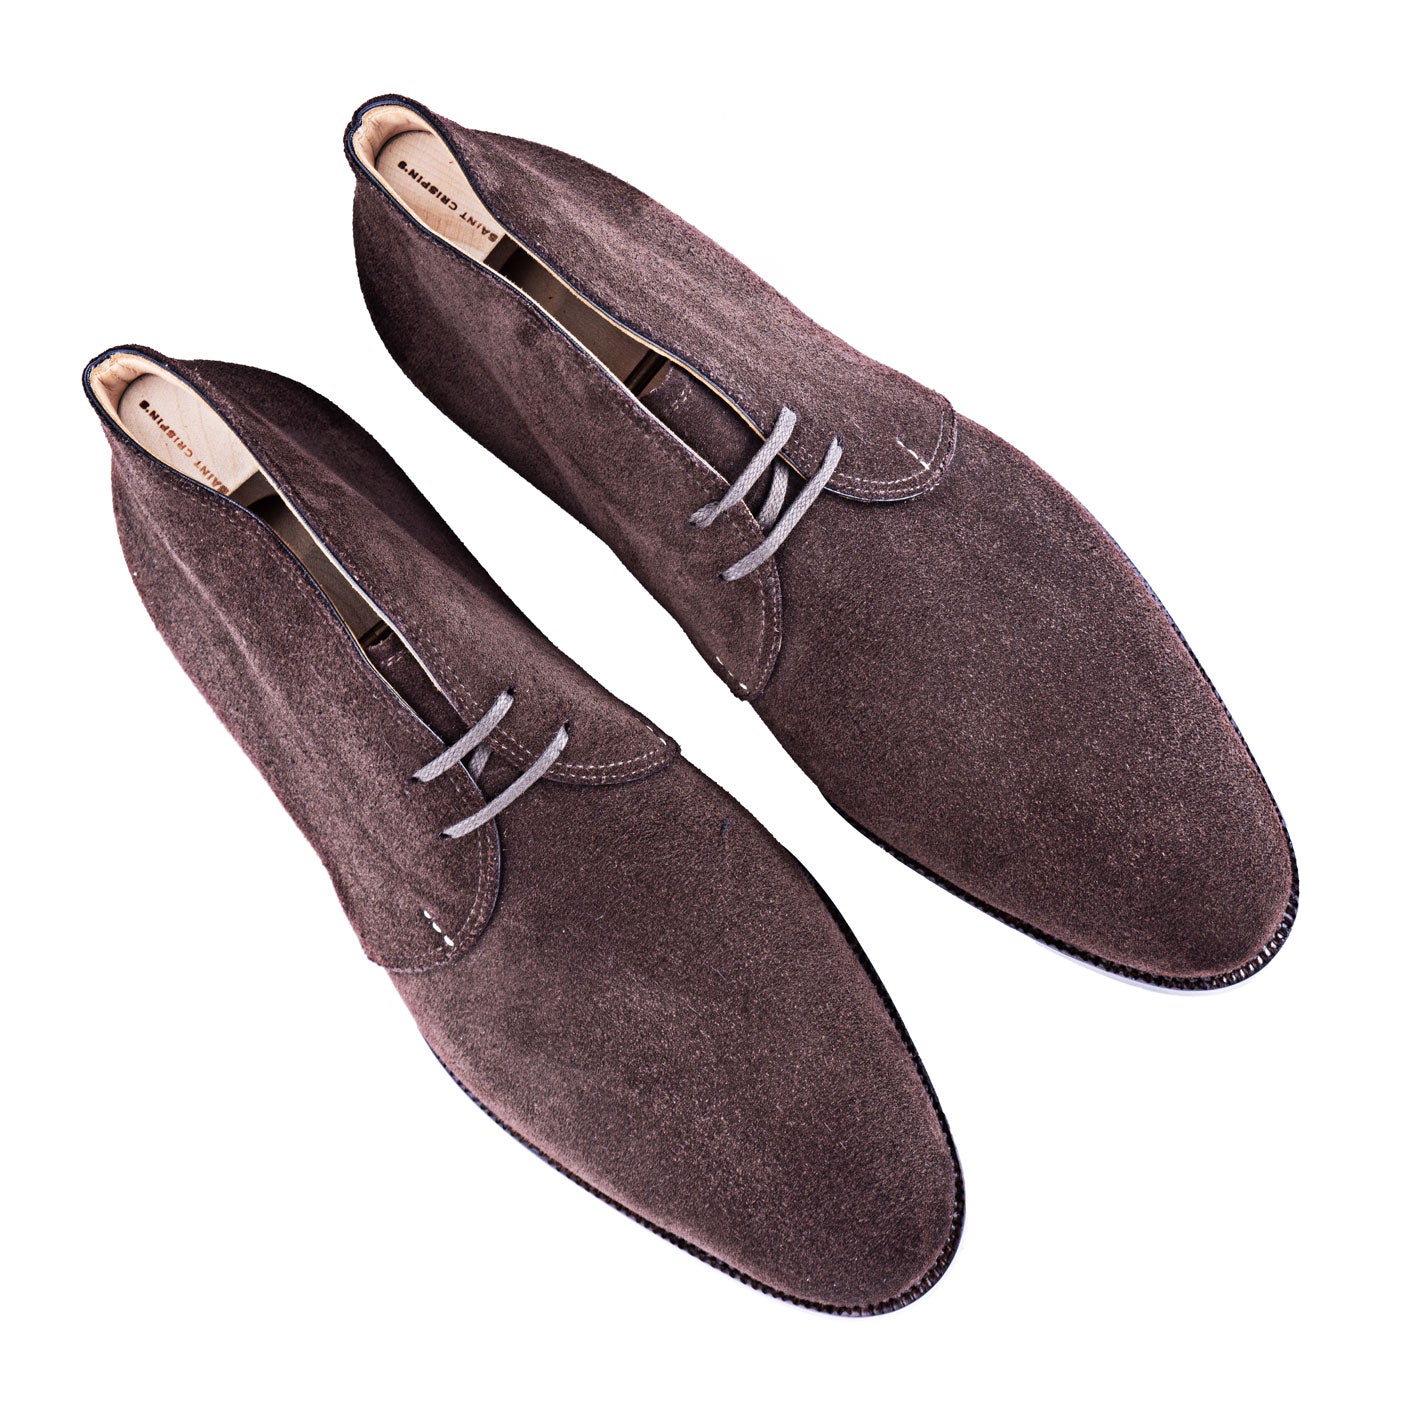 Chukka Boots with curved topline in dark brown suede